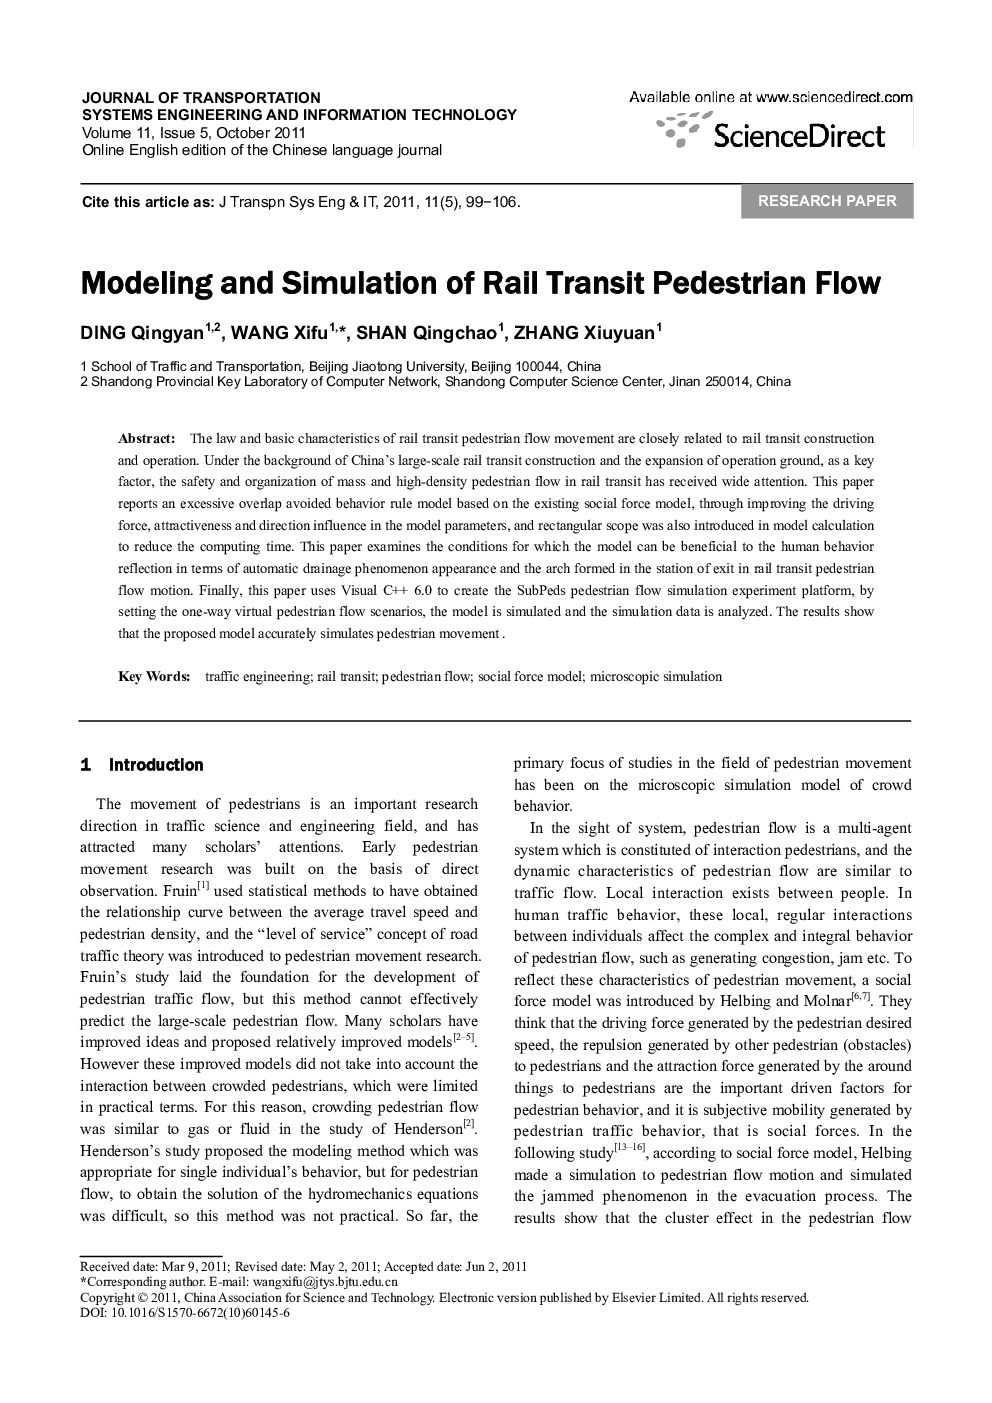 Modeling and Simulation of Rail Transit Pedestrian Flow